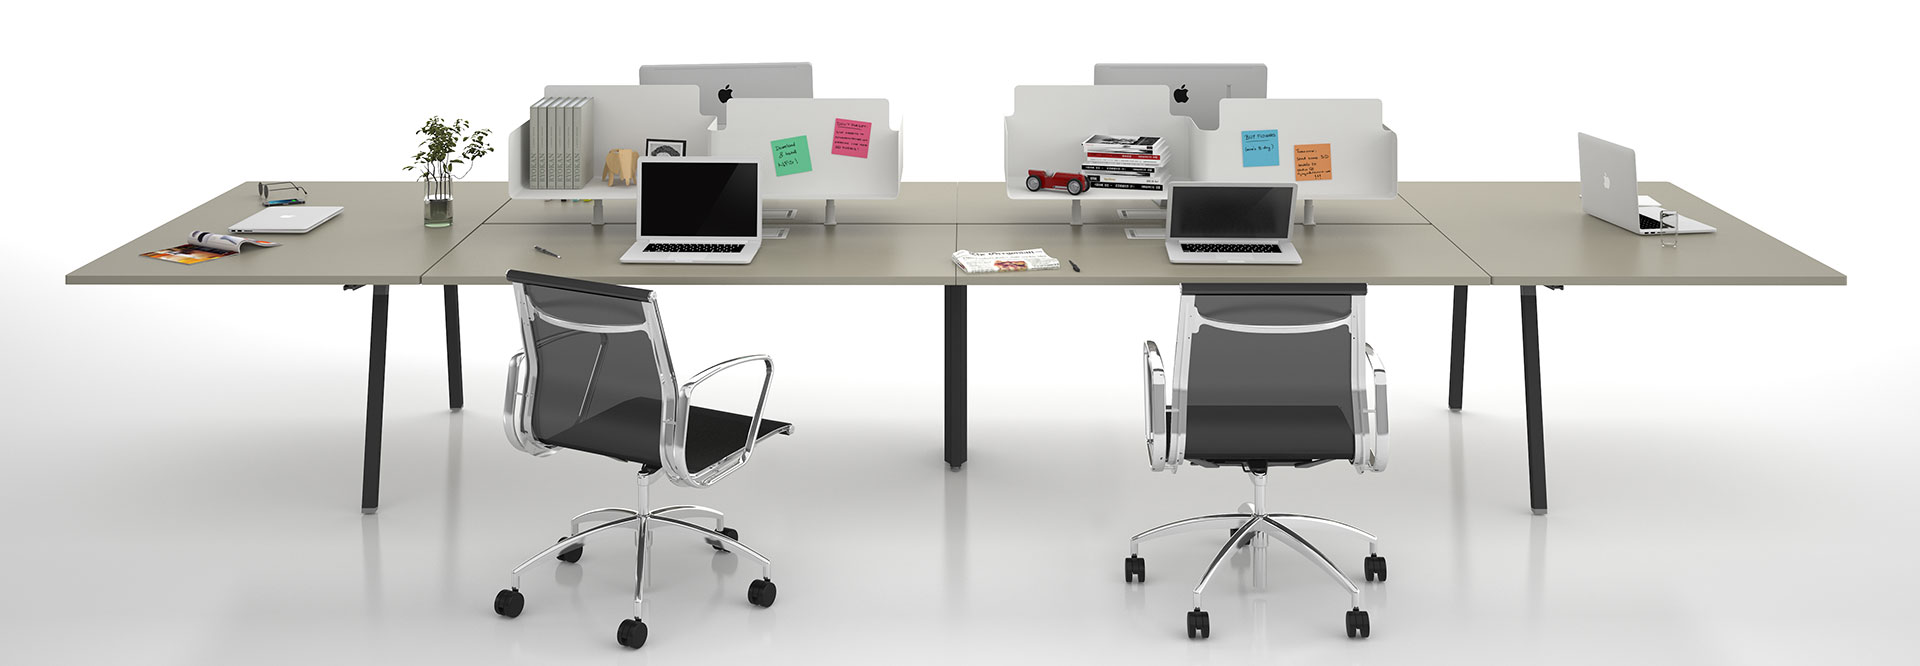 Klug workstation with extended meeting end paired with Como Air chairs